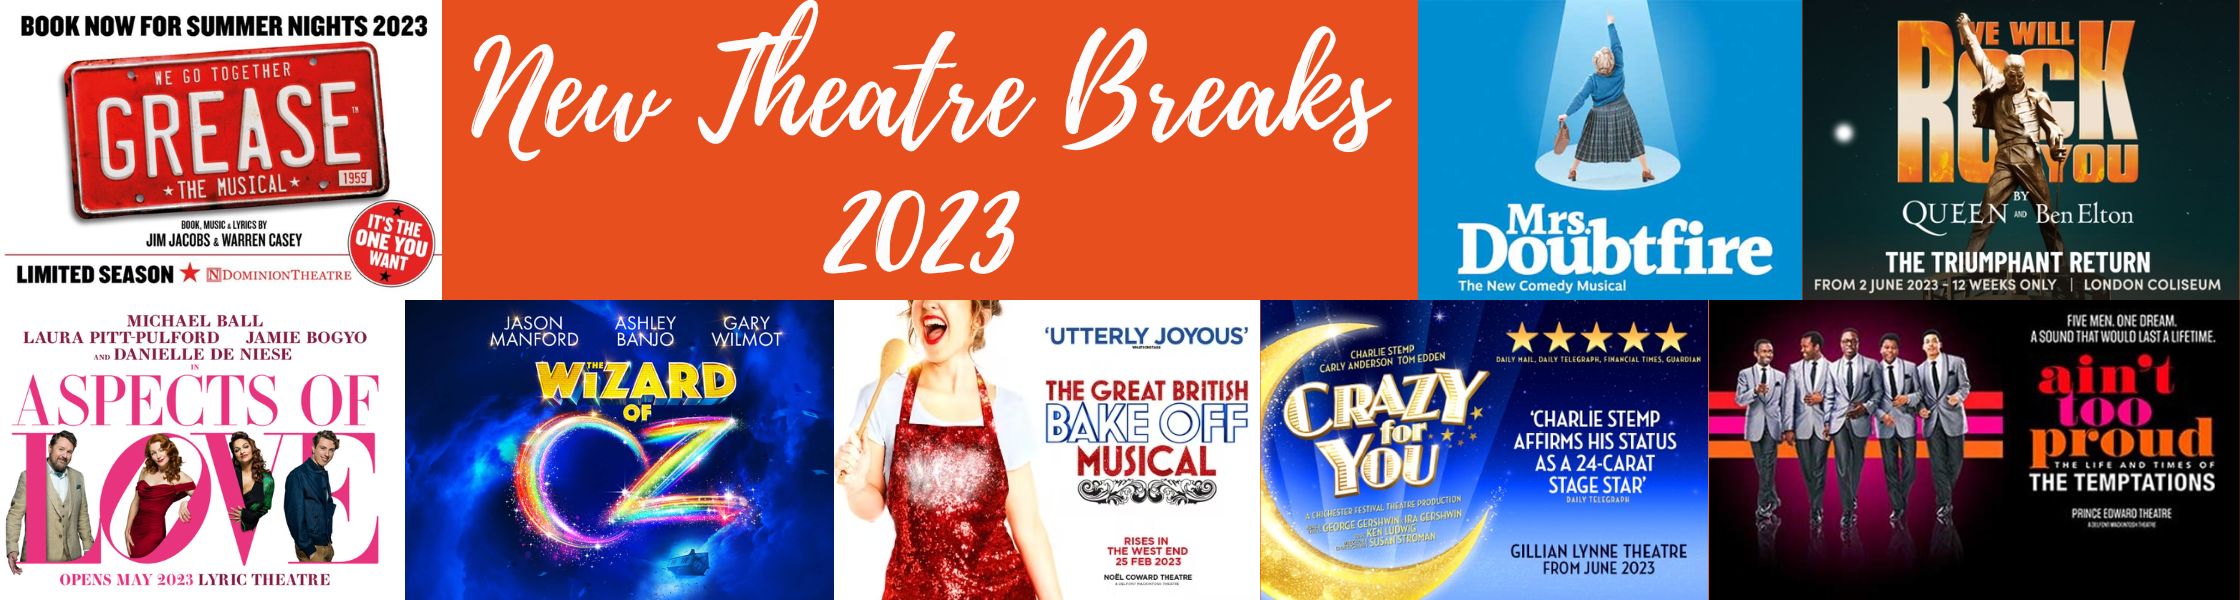 New Theatre Breaks for 2023